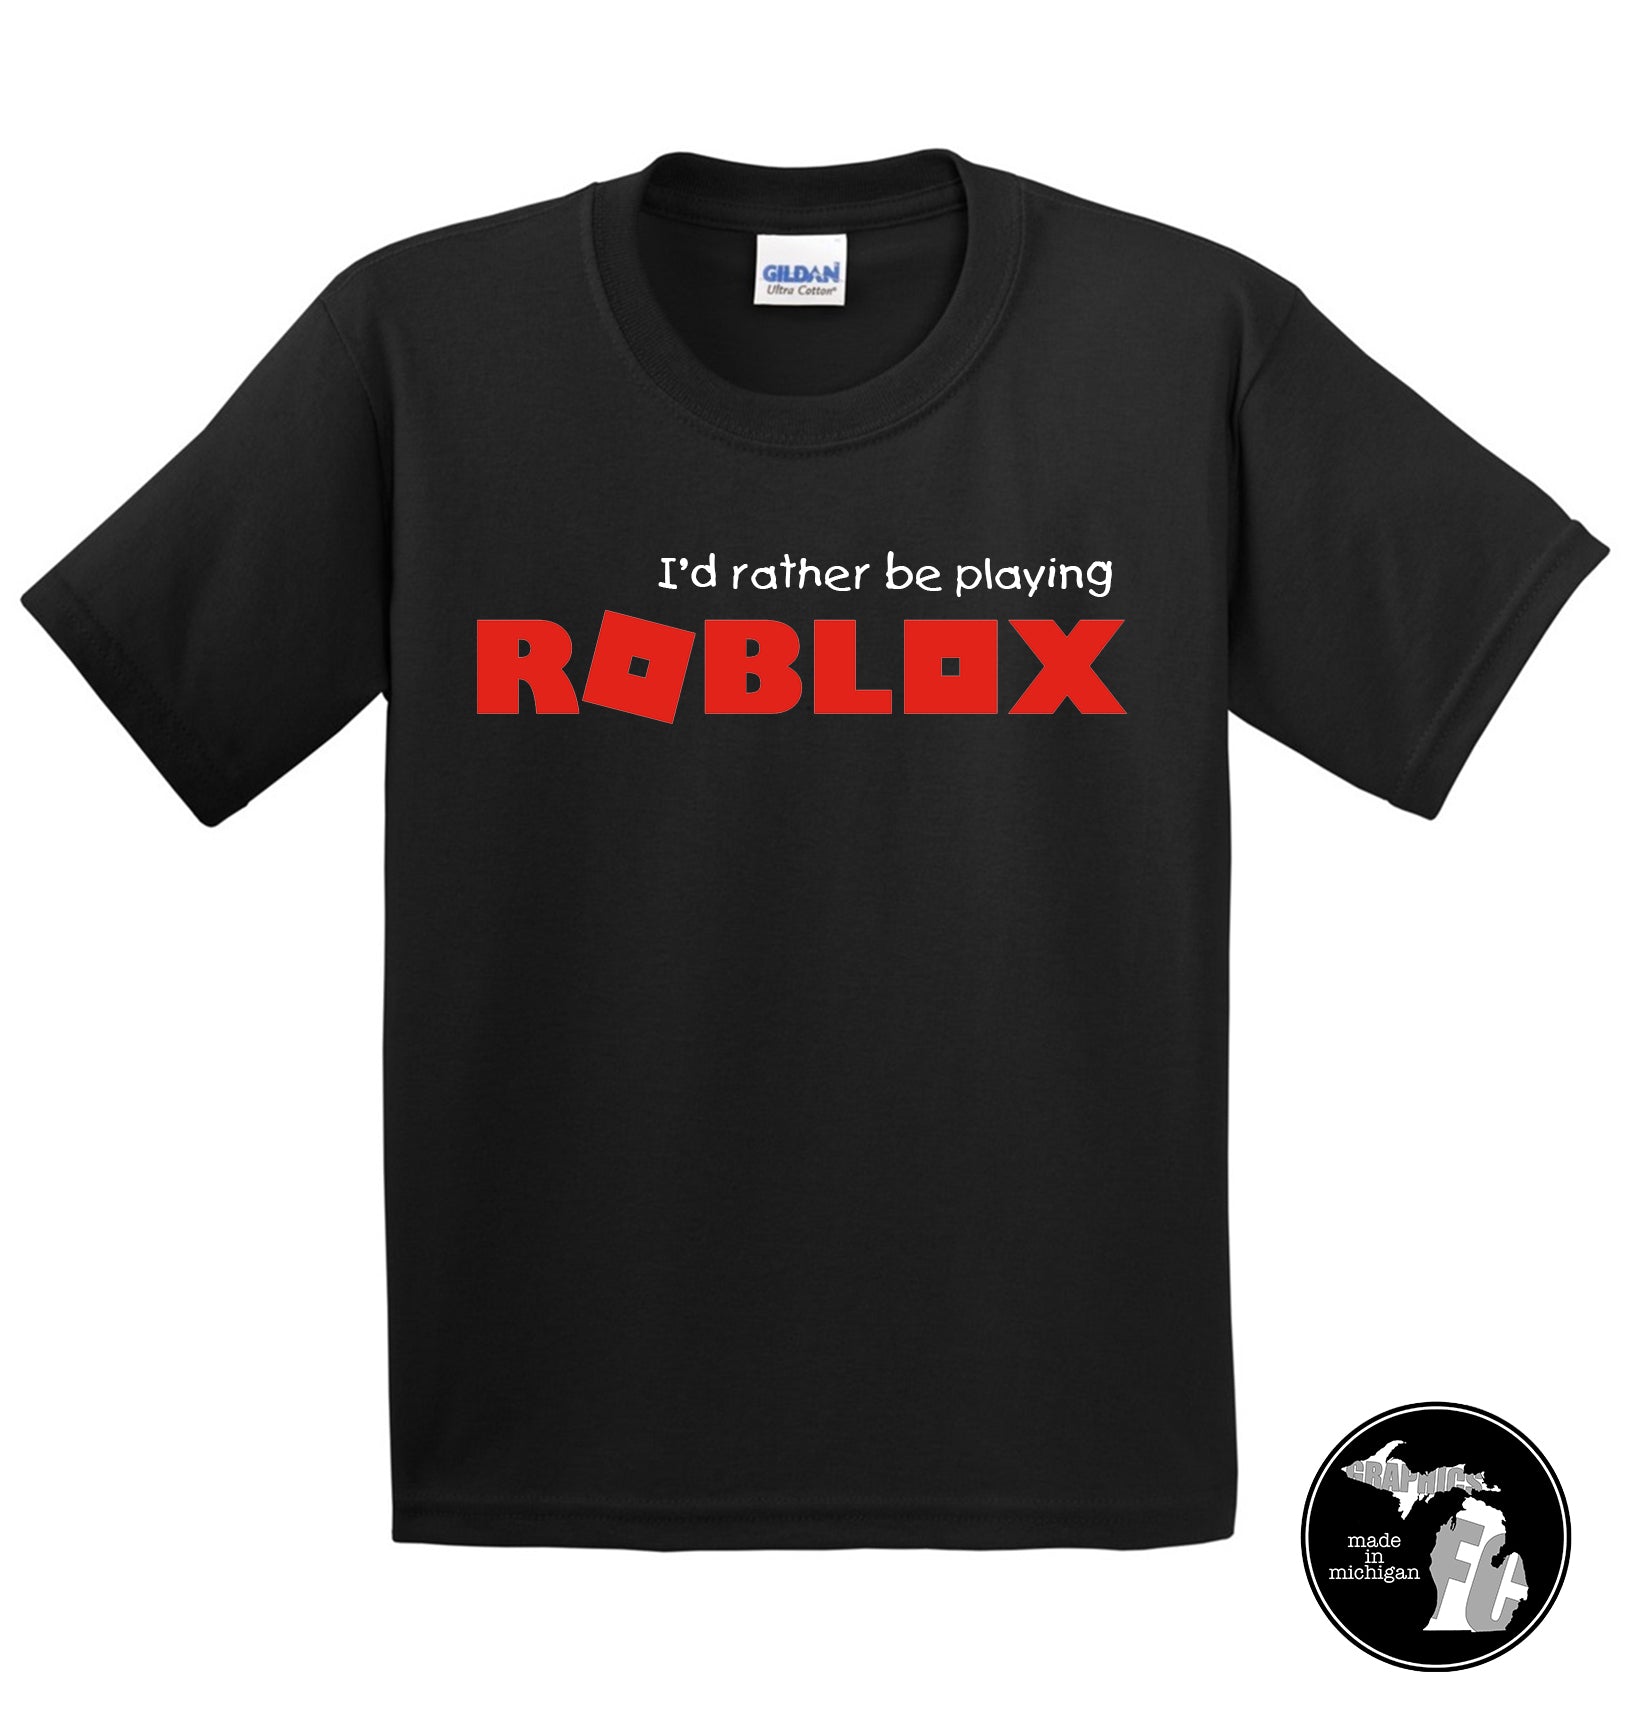 If you want buy my T-Shirt in roblox